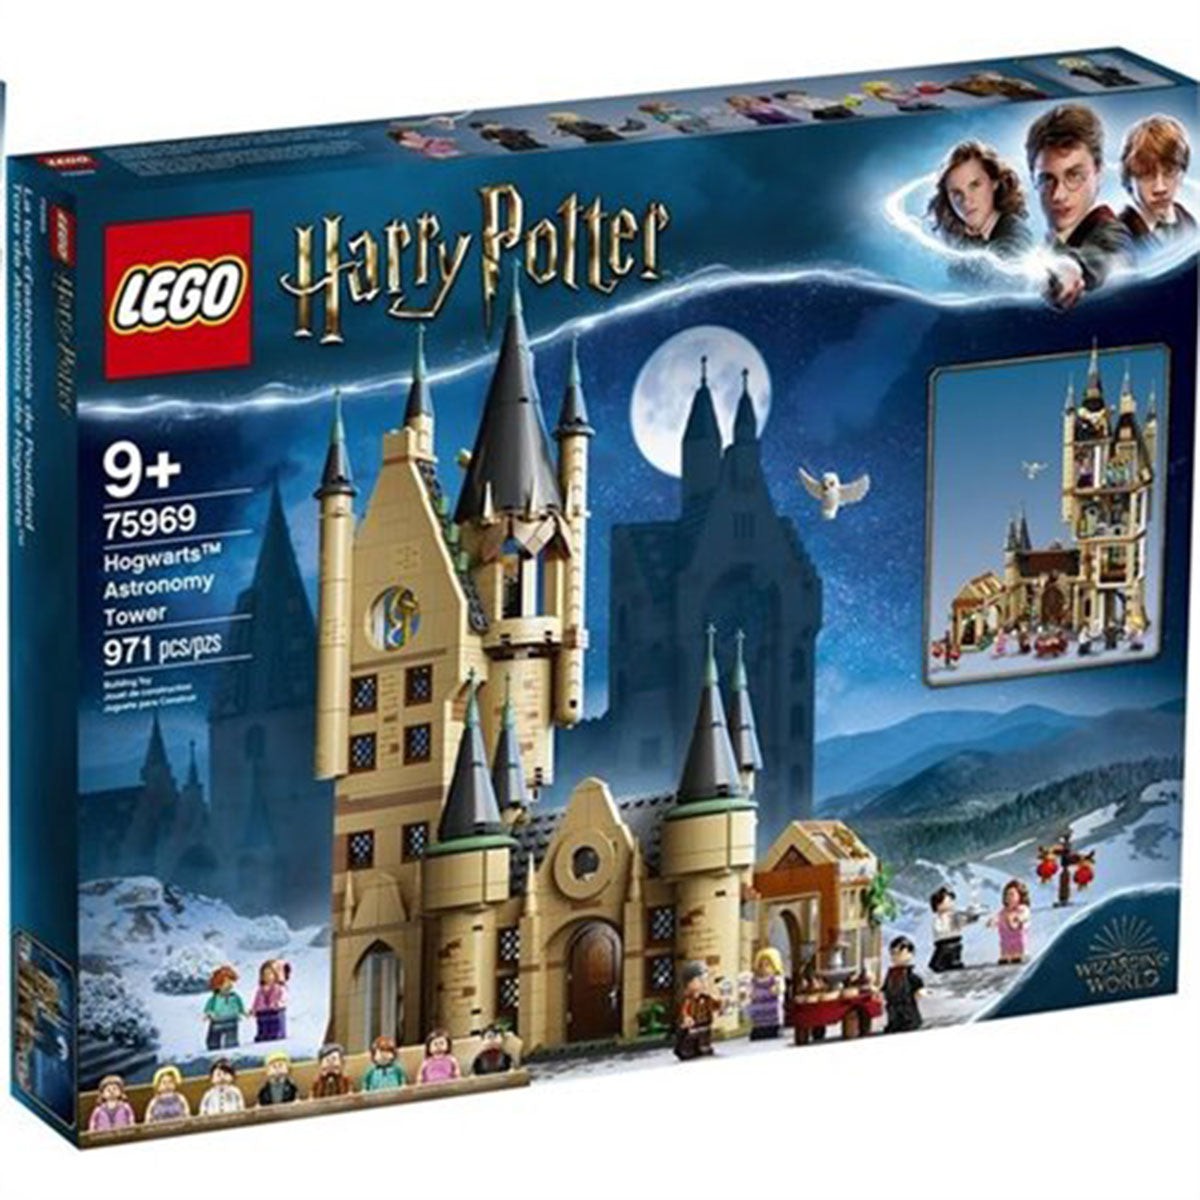 LEGO JOUET K.I.D. INC Toys & Games LEGO Harry Potter Hogwarts Astronomy Tower, 75969, Ages 9+, 971 Pieces 673419317914